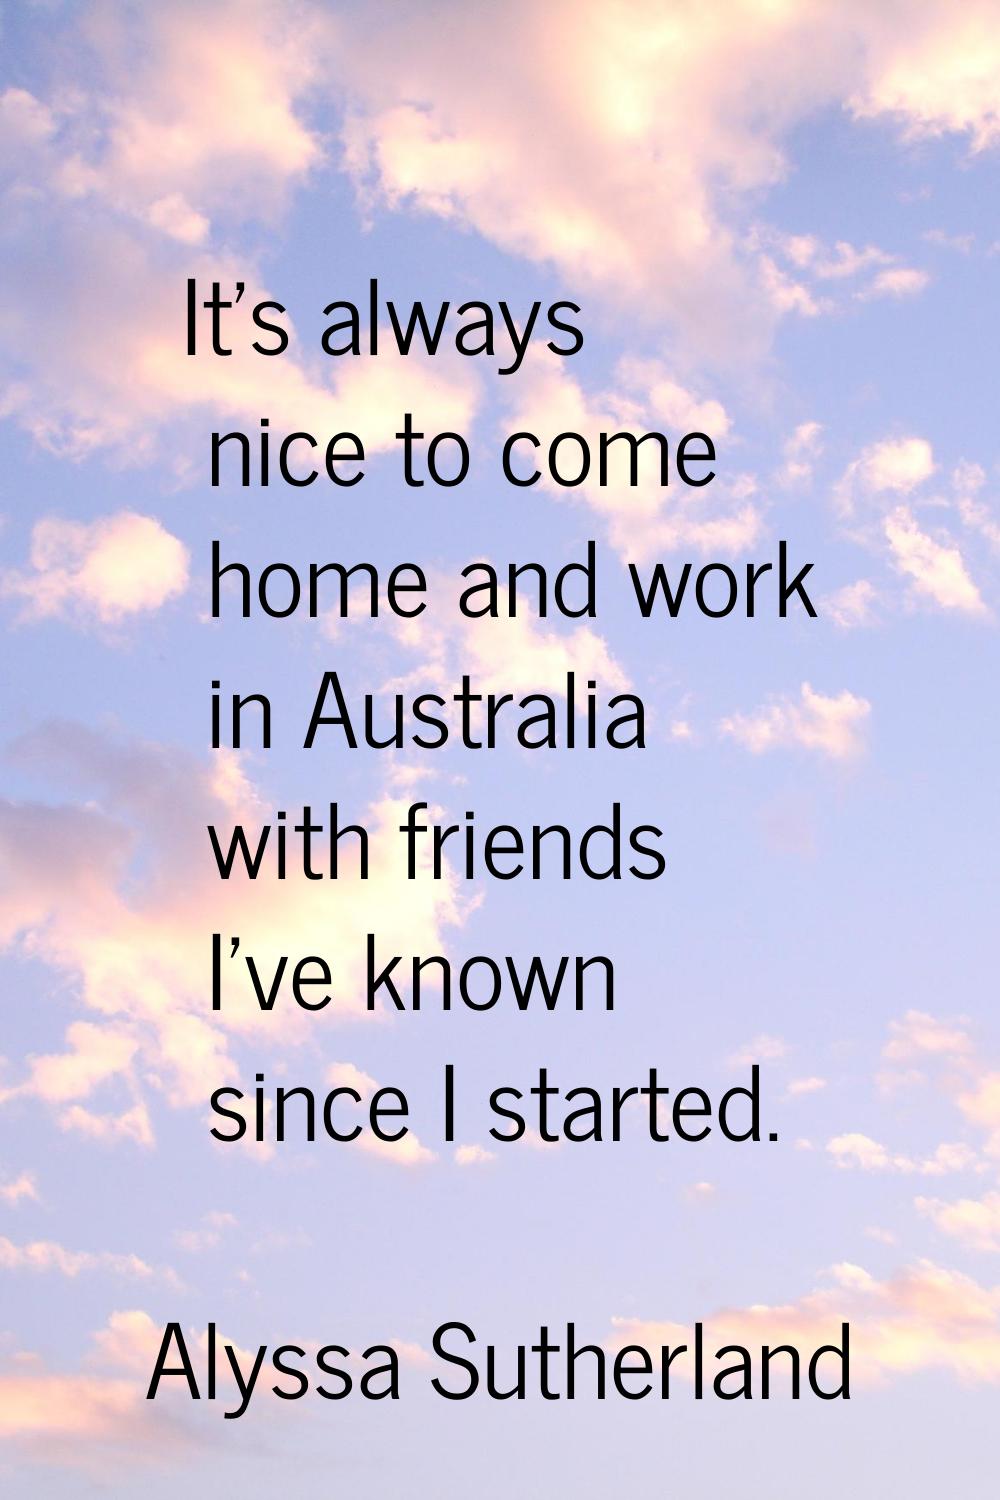 It's always nice to come home and work in Australia with friends I've known since I started.